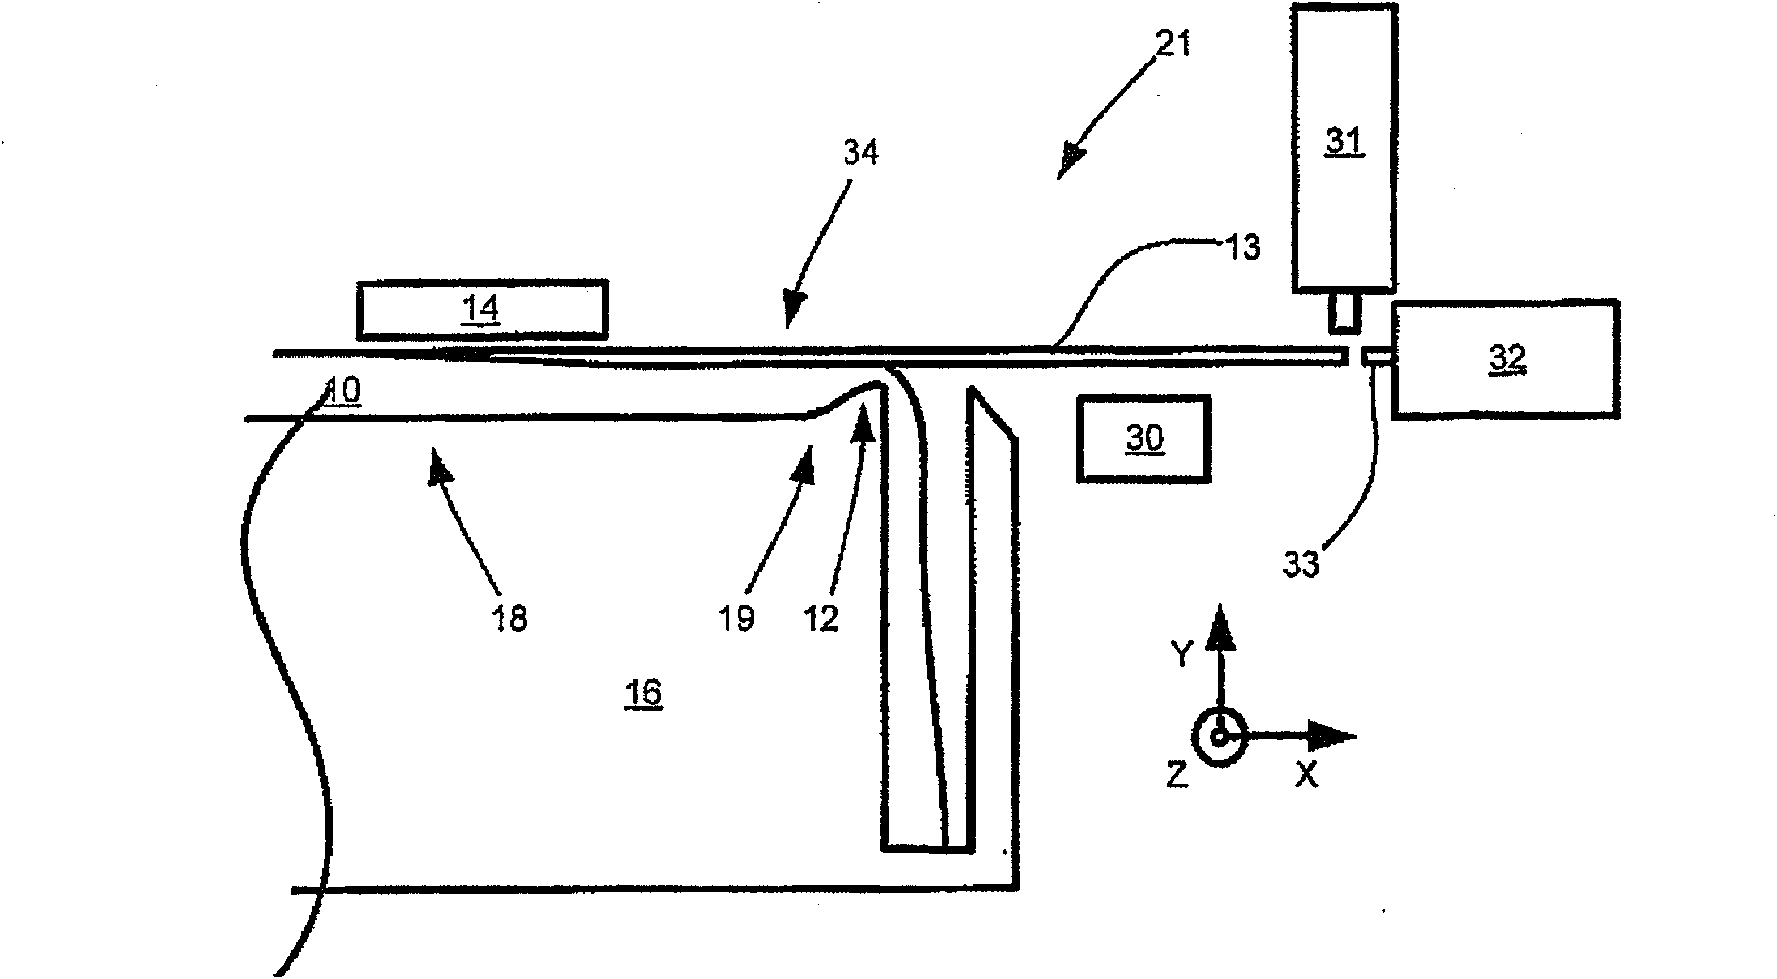 Removal of a sheet from a production apparatus